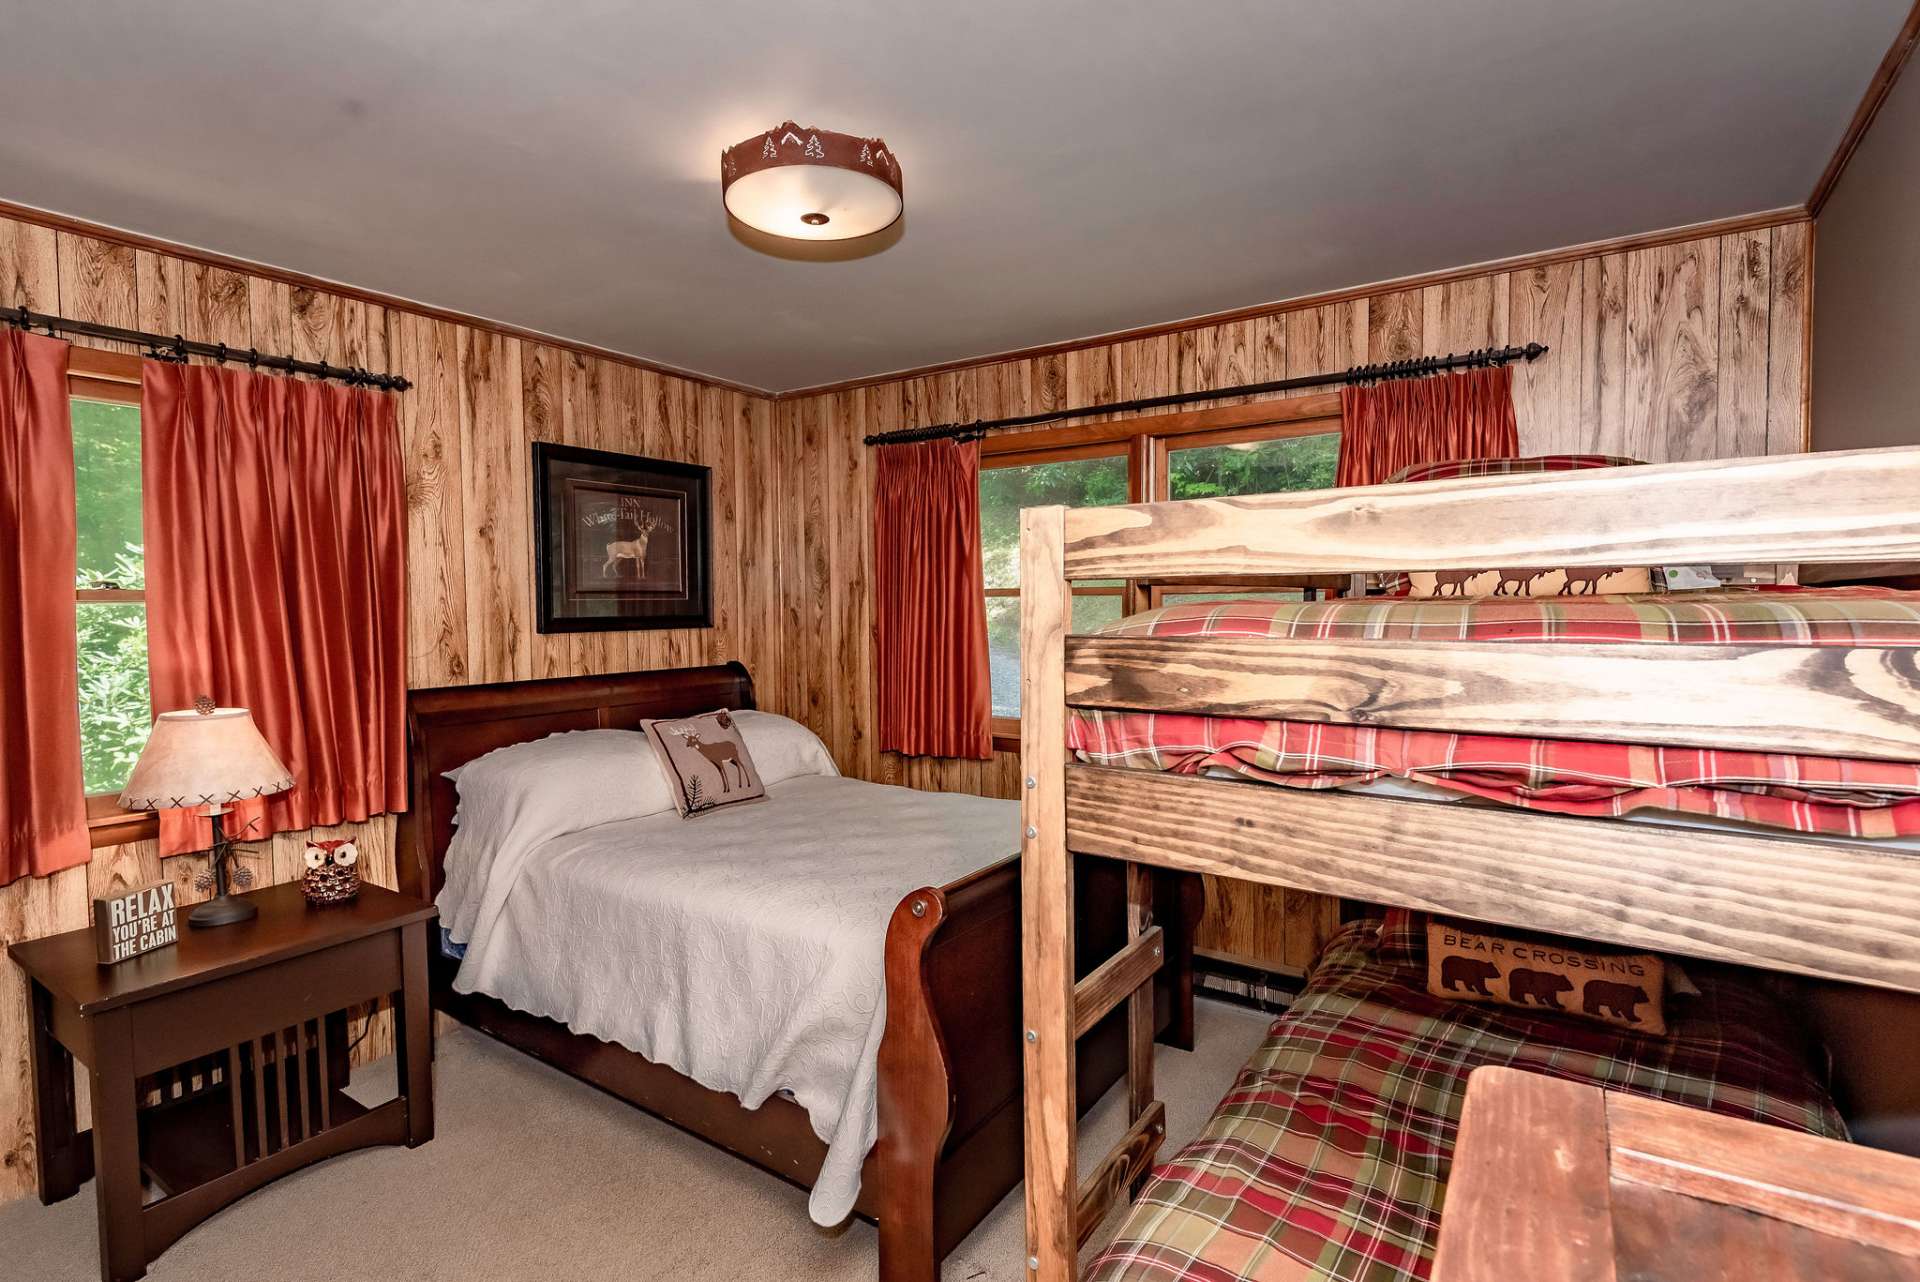 This is the second main level bedroom with plenty of space for a queen bed and a set of bunk beds.